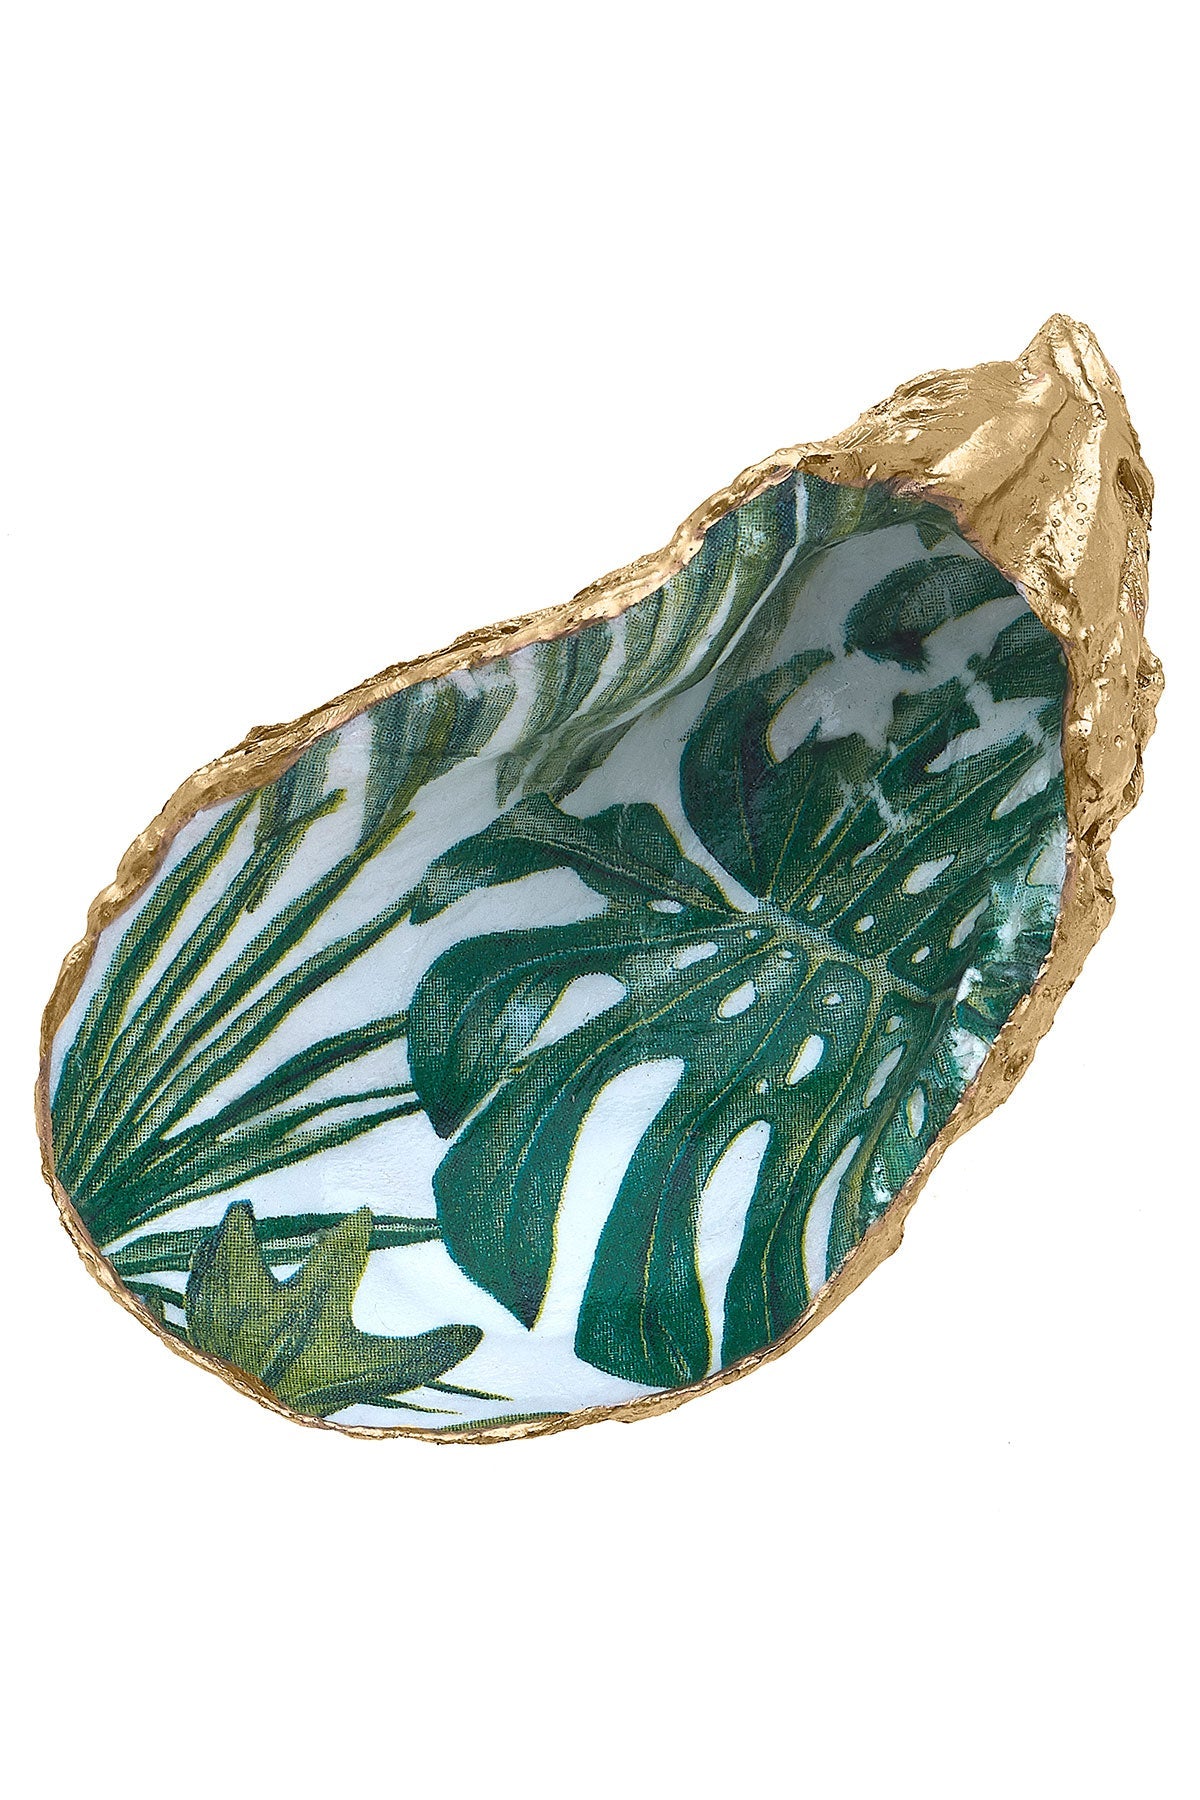 Brooks Decoupage Oyster Ring Dish in Green & White